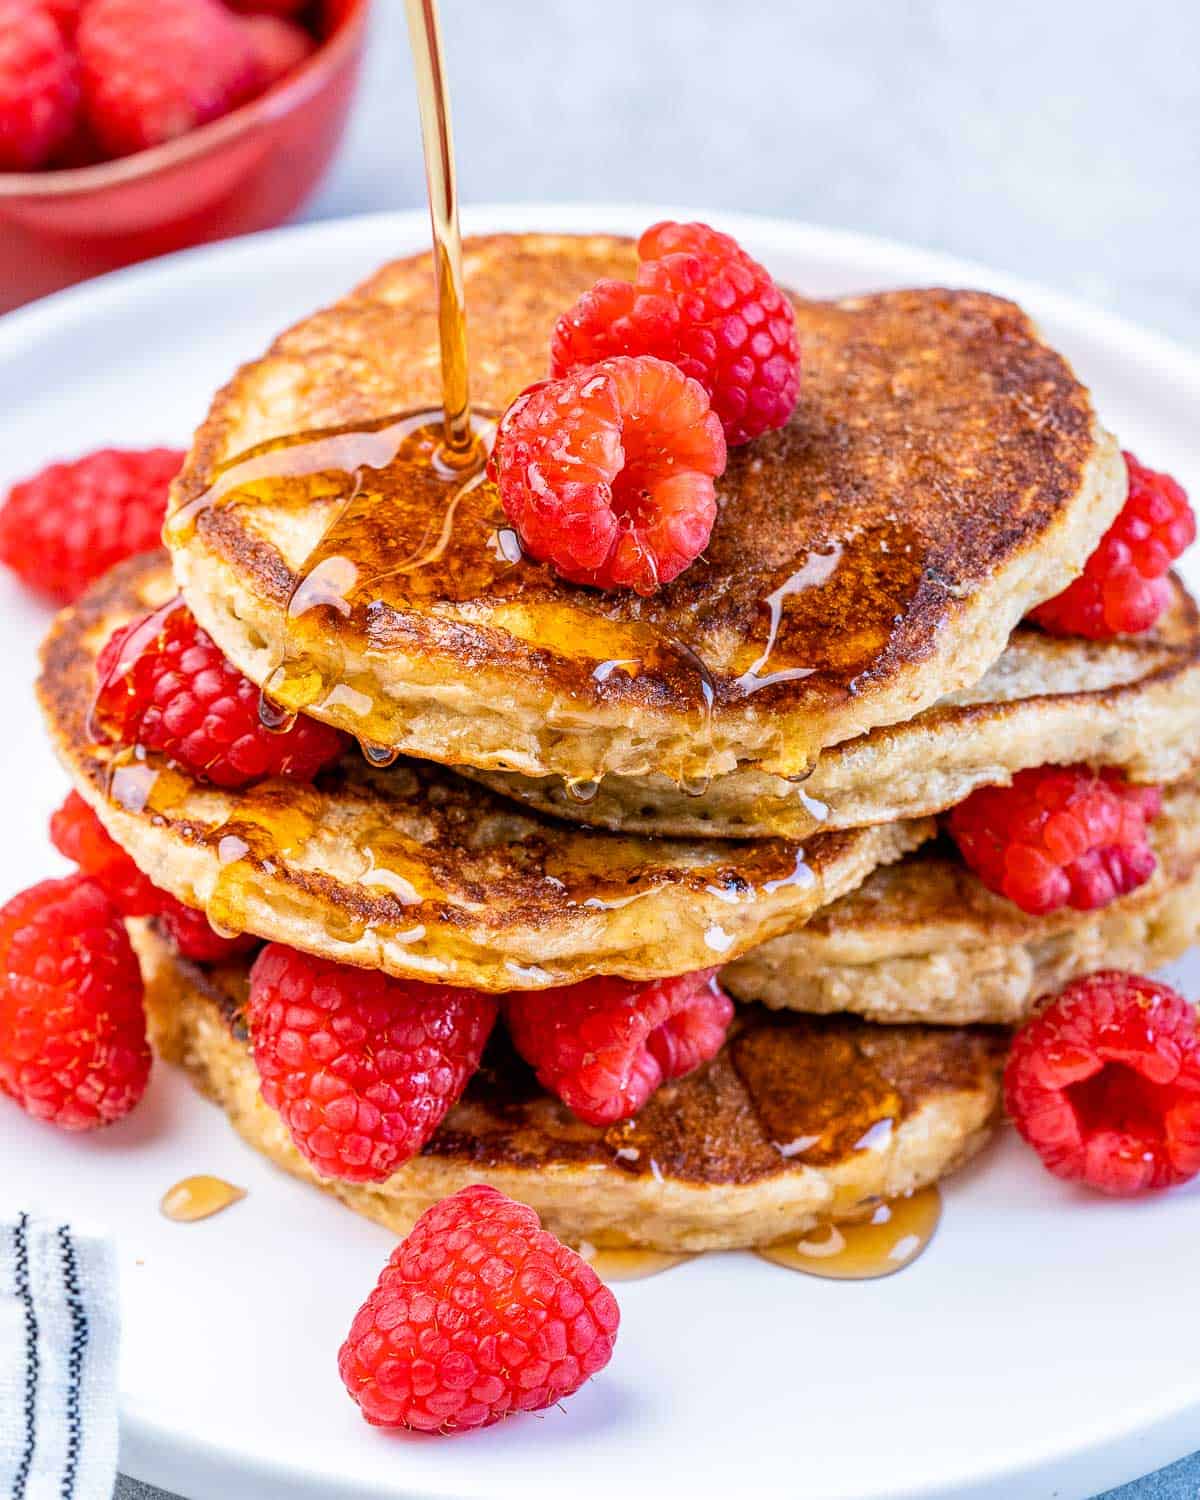 Drizzling syrup over pancakes that are topped with raspberries.